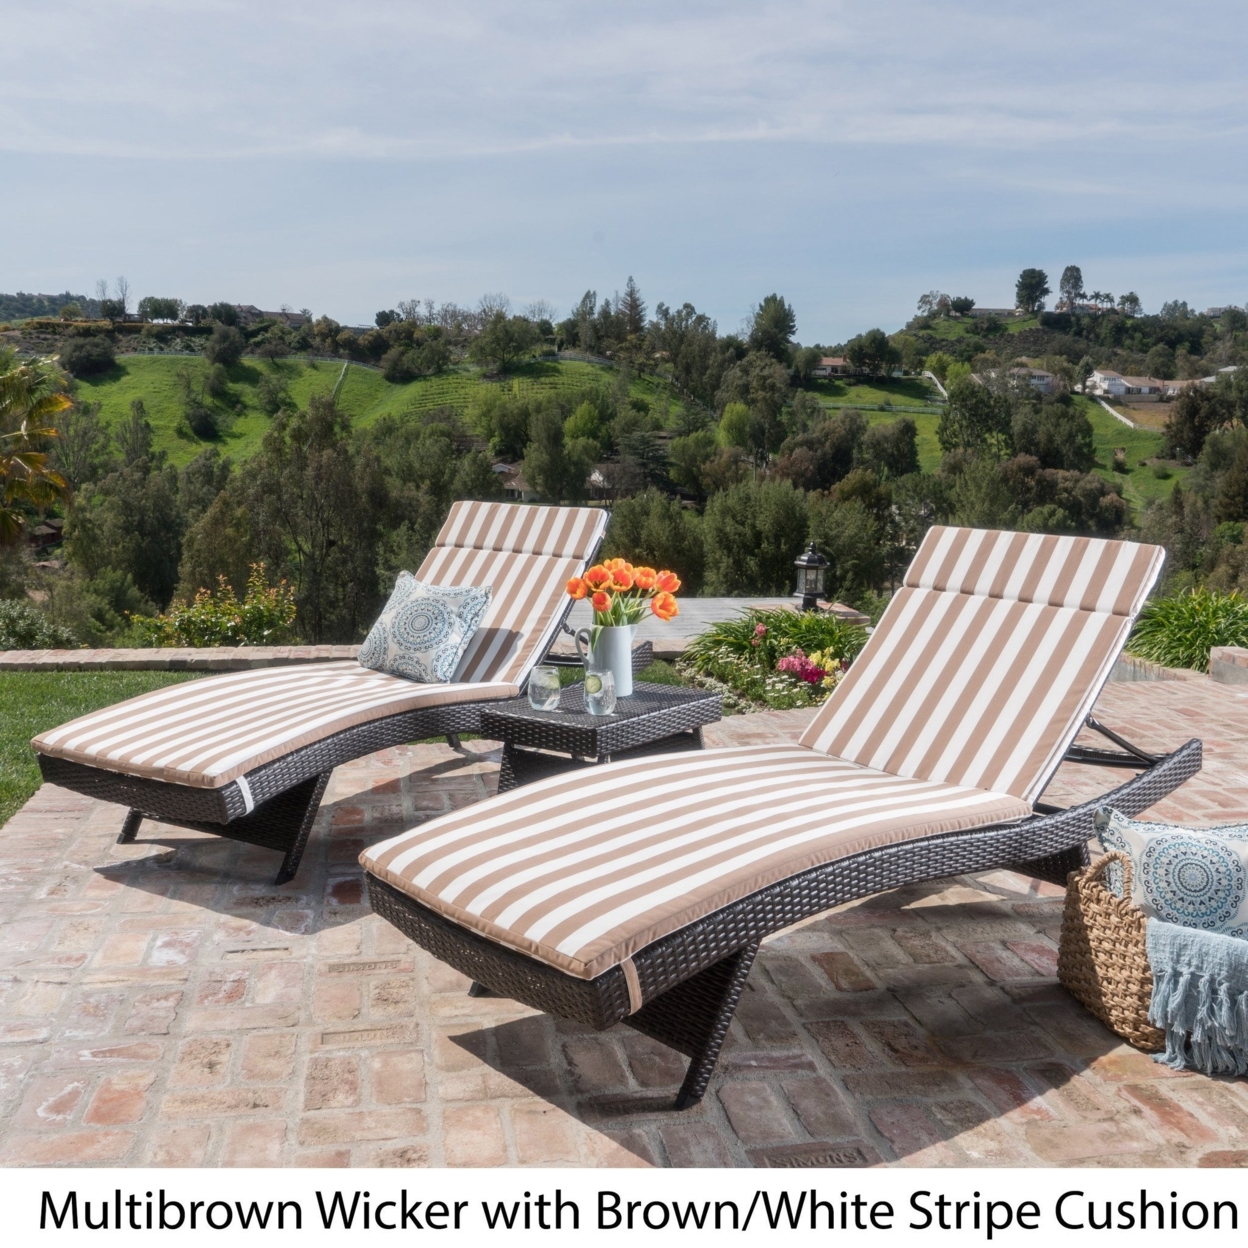 Lakeport 3pc Outdoor Wicker Chaise Lounge Chair & Table Set With Cushions - Caramel Cushion, Gray